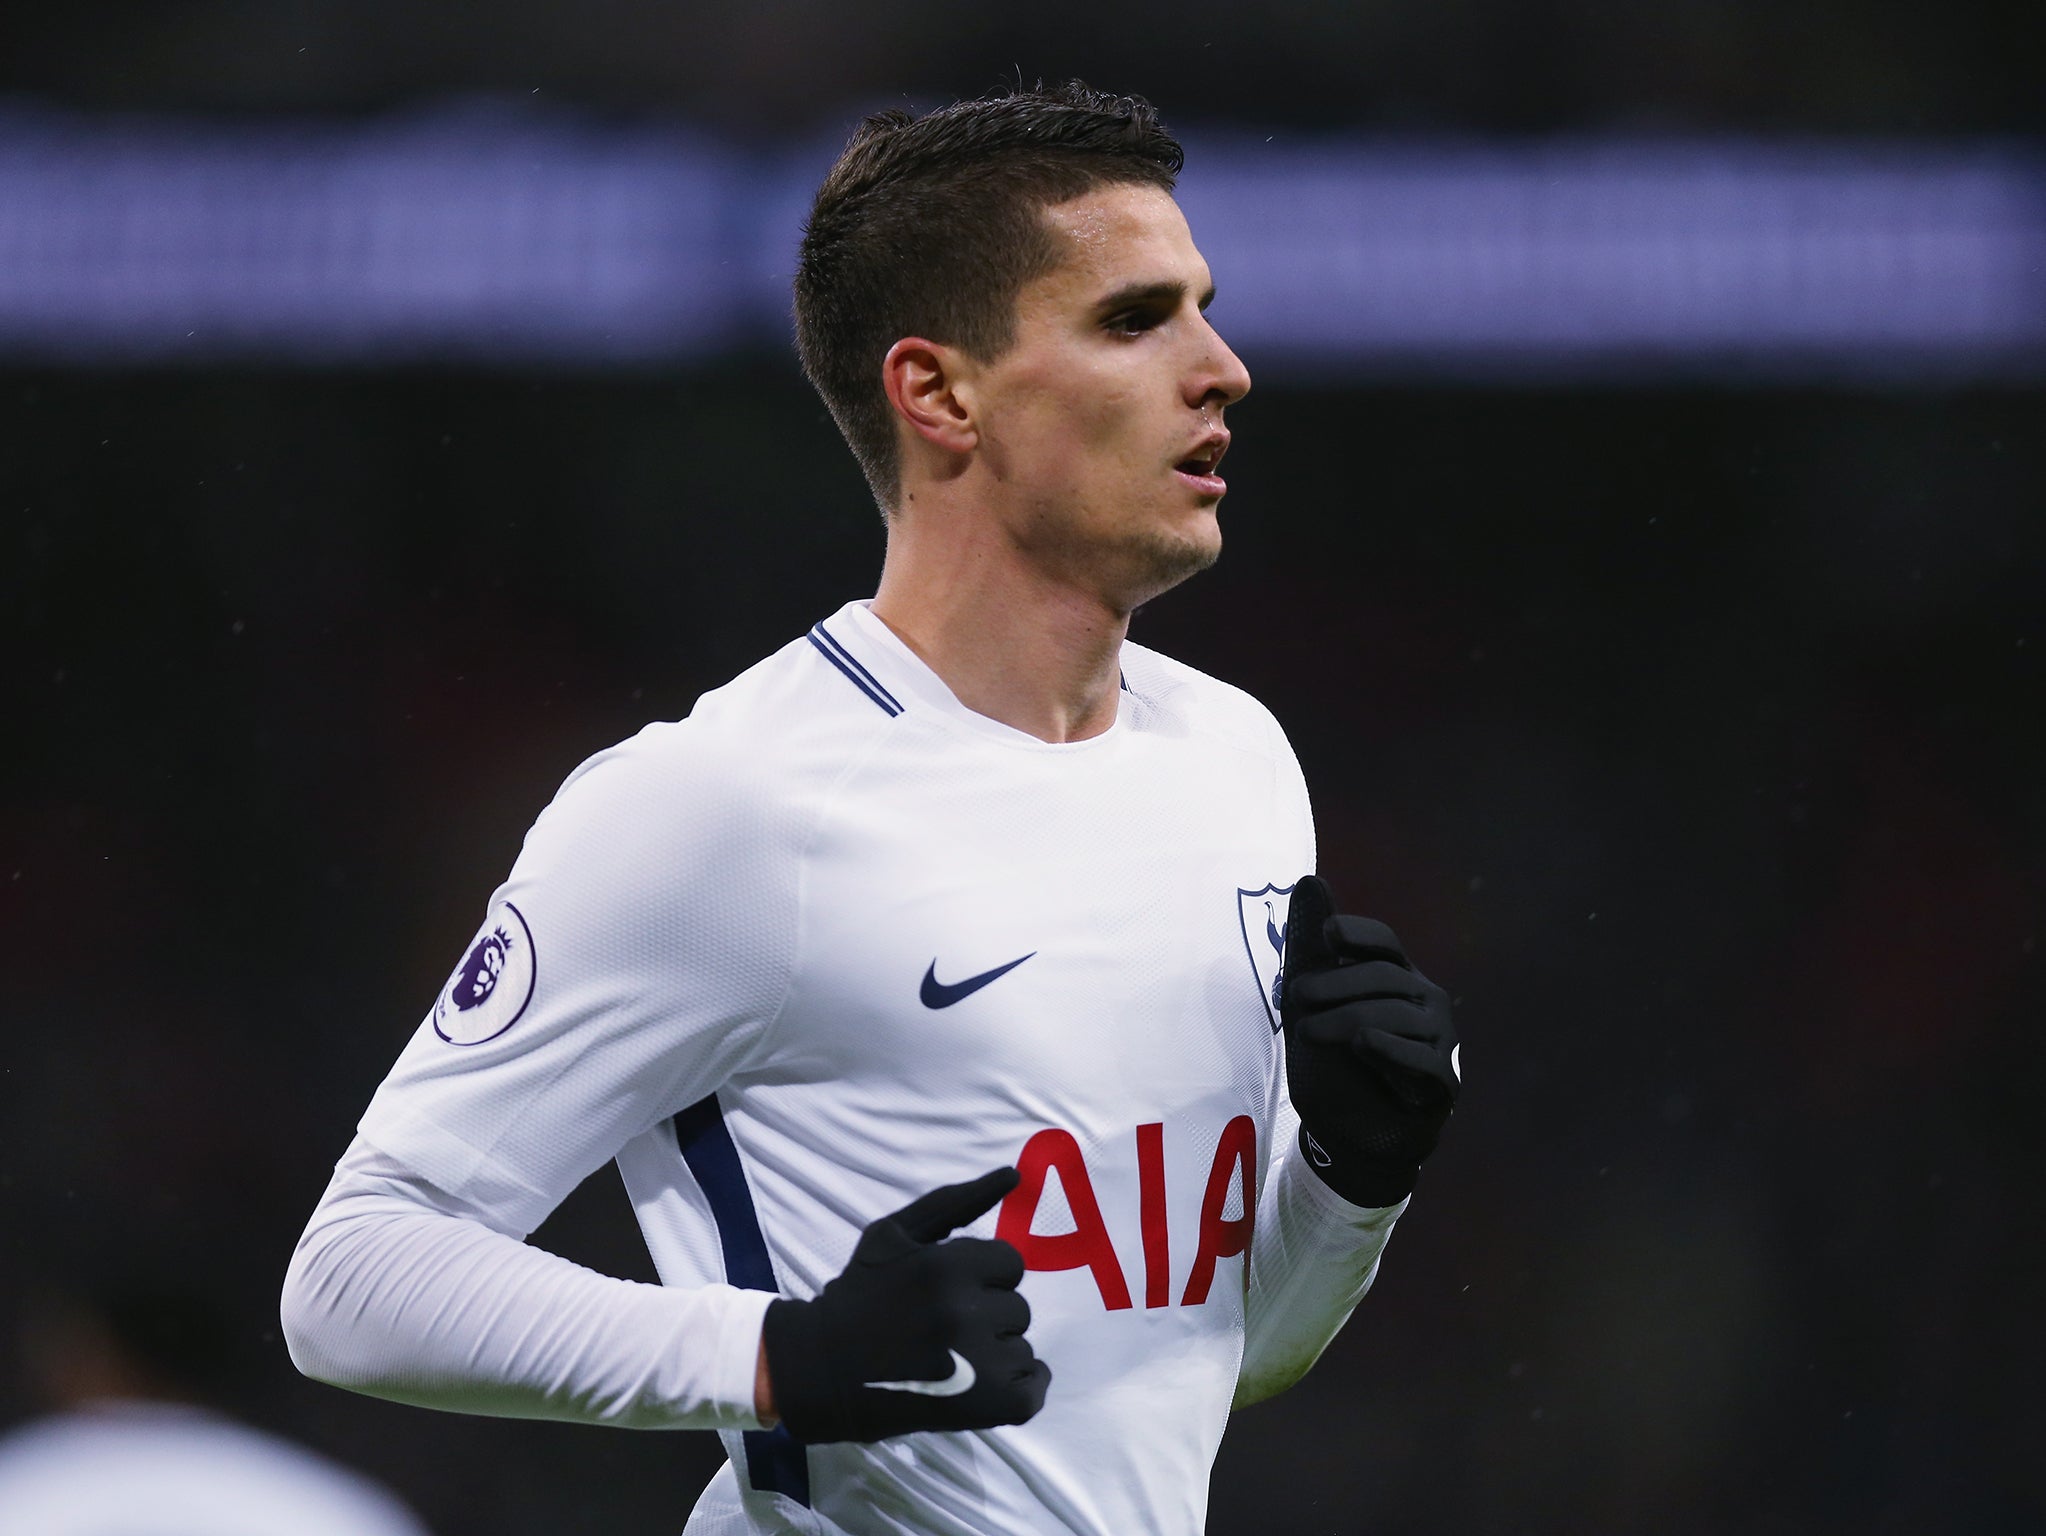 If Tottenham were to agree to let Lamela go, it would likely only be a loan deal